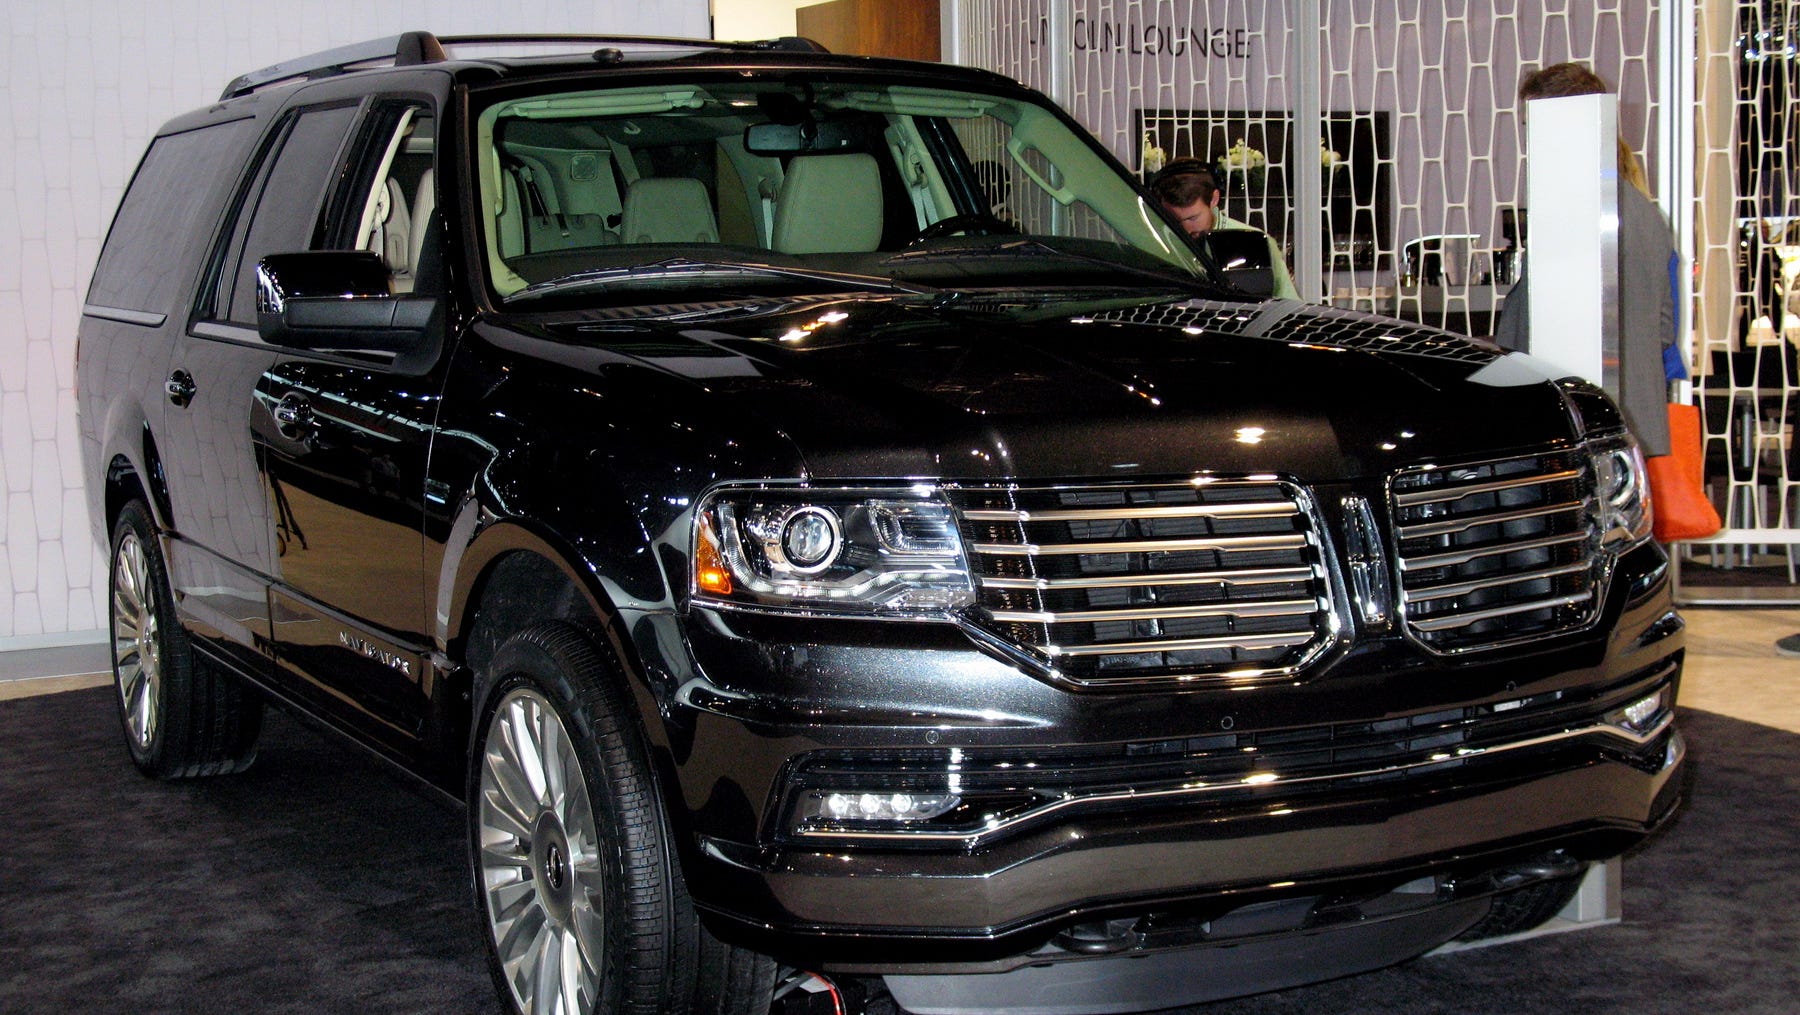 New look for 2015 Lincoln Navigator SUV